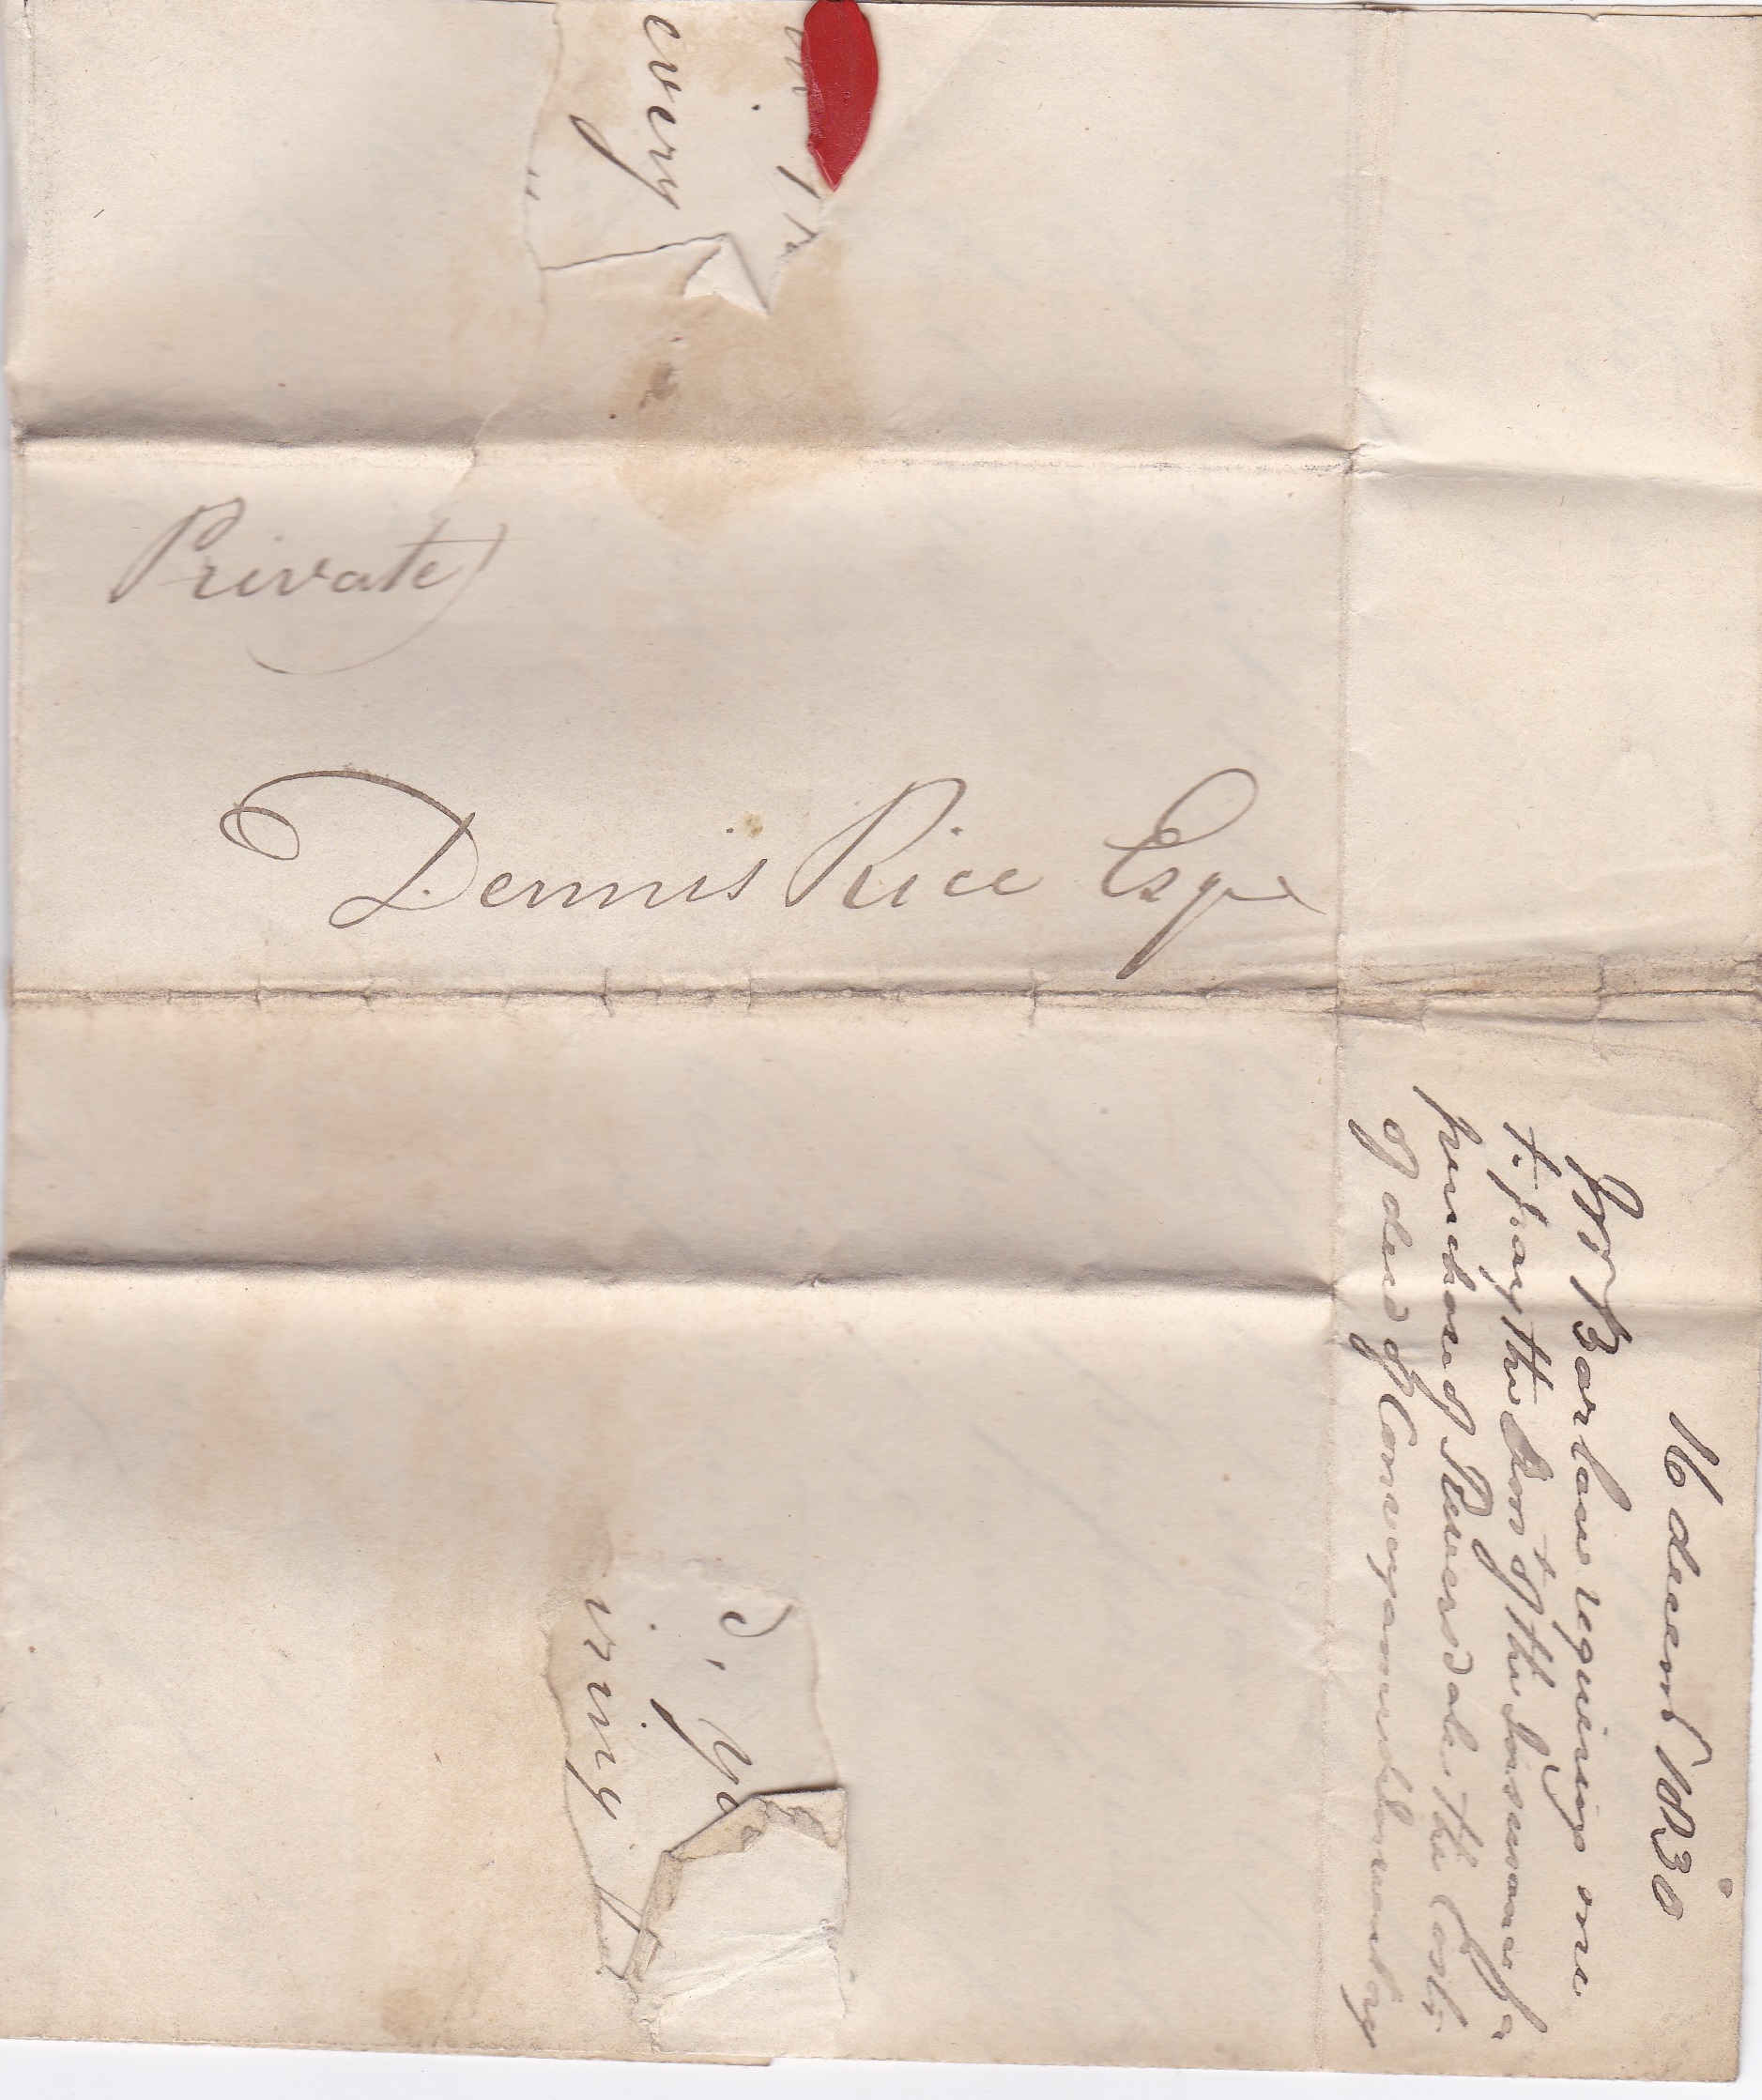 Great Britain 1840 Postal History - folded letter dated 16th Dec 1830 Dublin. No address and